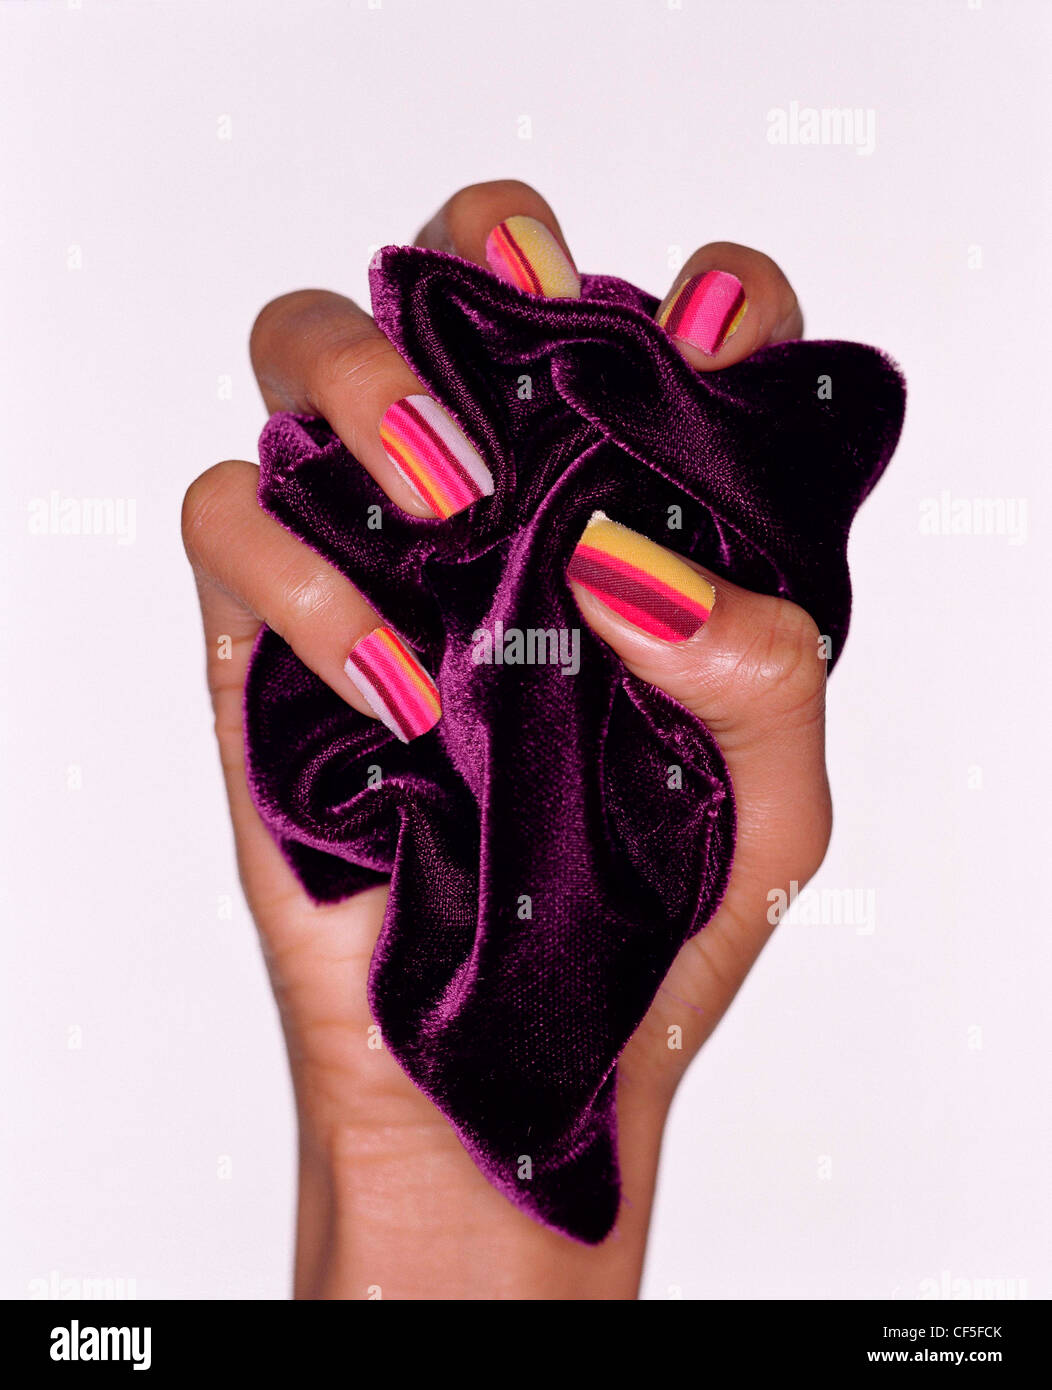 Female wearing pink striped nail varnish holding a piece of purple fabric in her fist Stock Photo